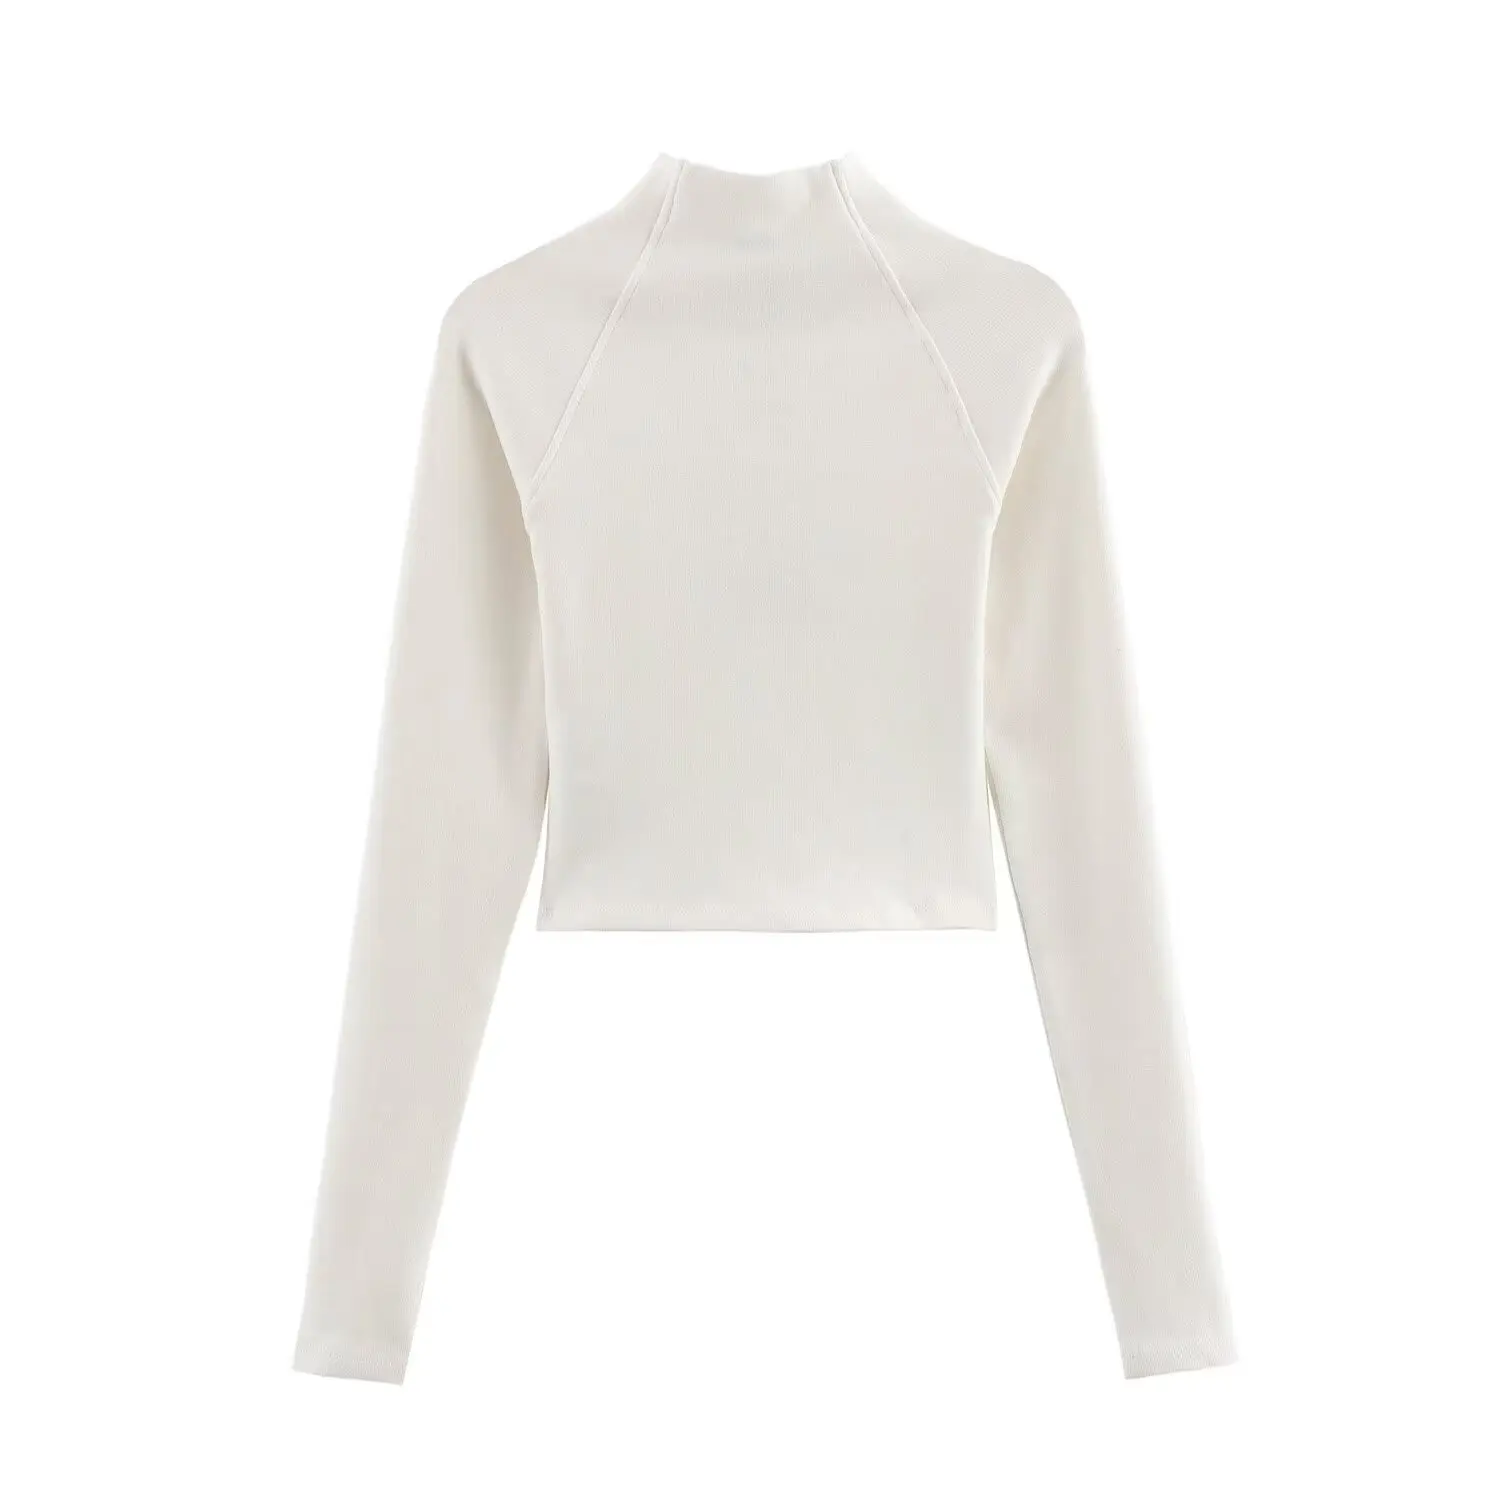 

Jenny&Dave High T-shirt Knitted Women Long Sleeve Basic Cropped Tops Street Sexy Short Tight